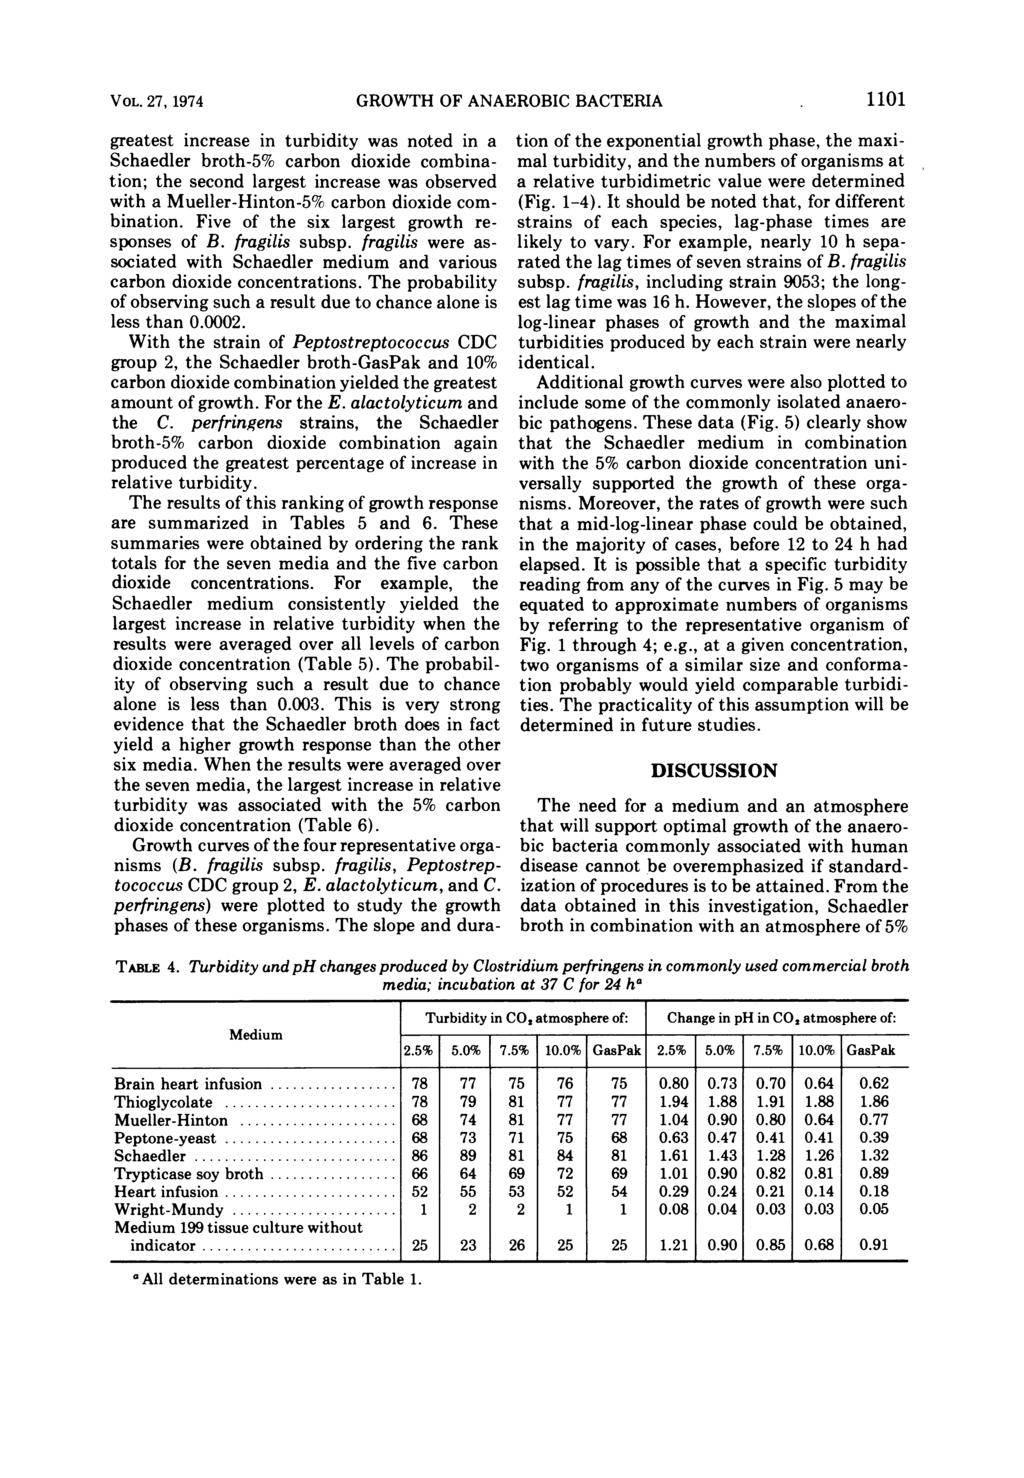 VOL. 27, 1974 GROWTH OF ANAEROBIC BACTERIA TABLE 4.